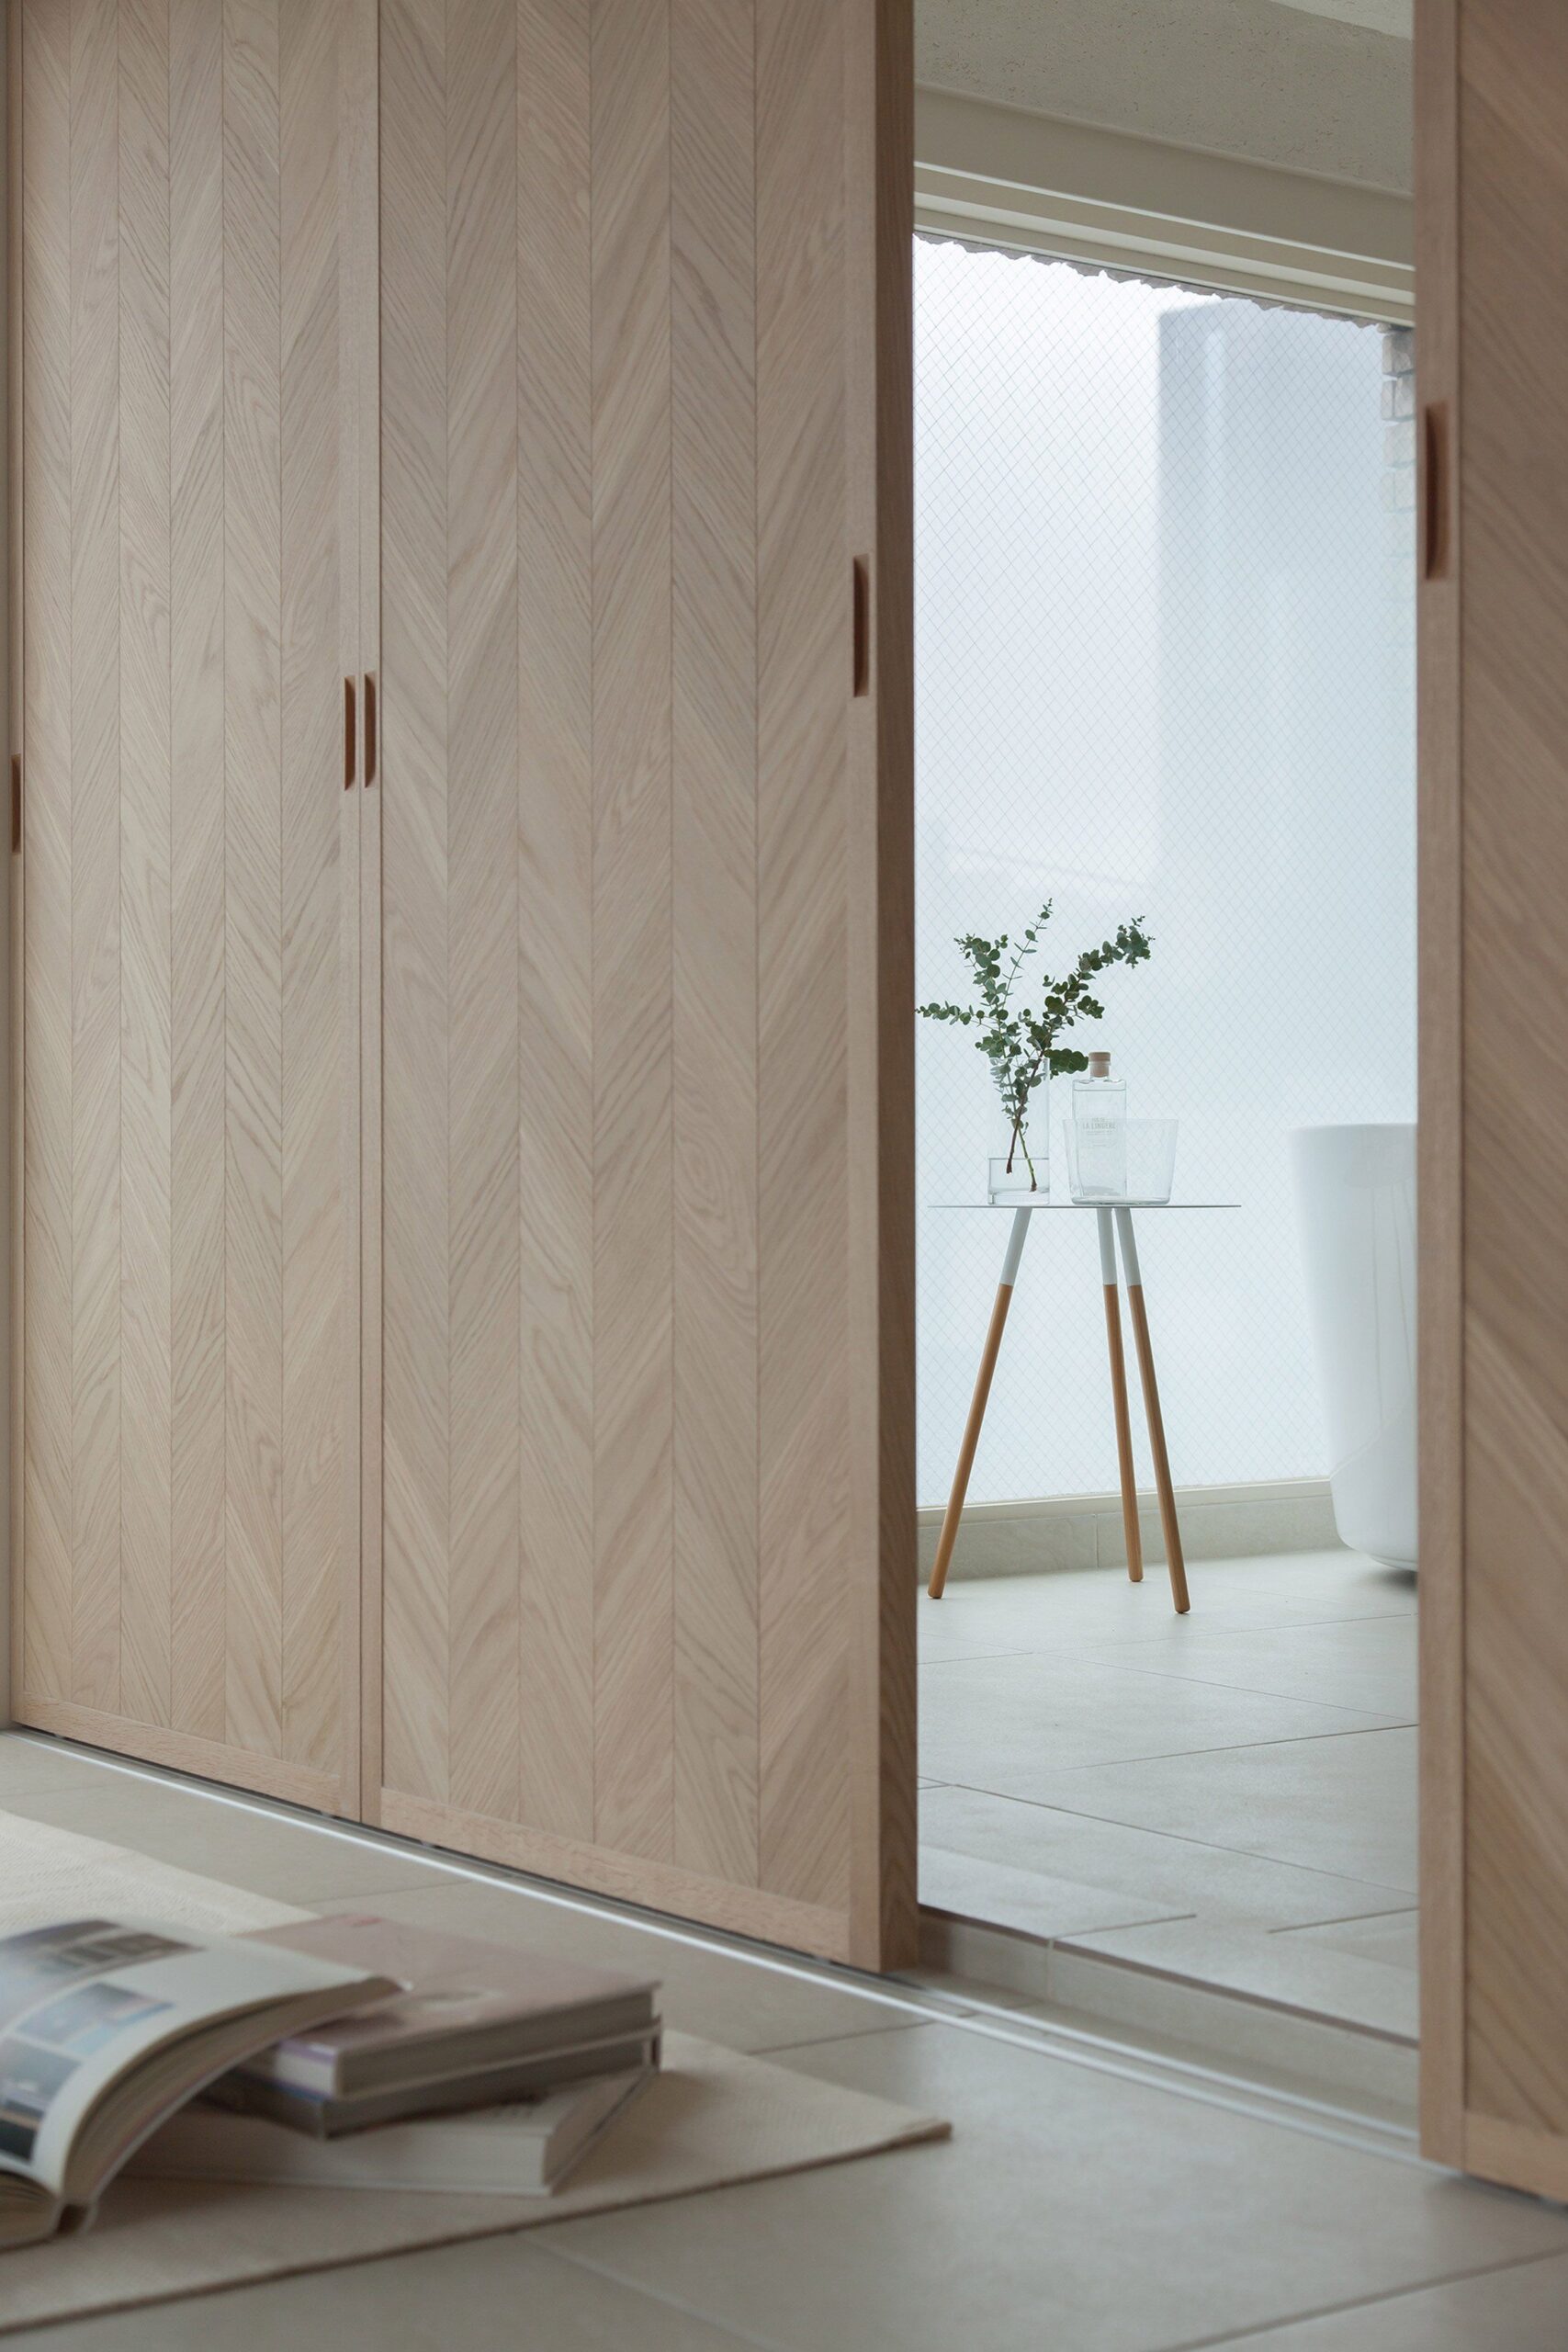 Sliding wardrobes are not the same as the traditional arrangement of pivoted wardrobes